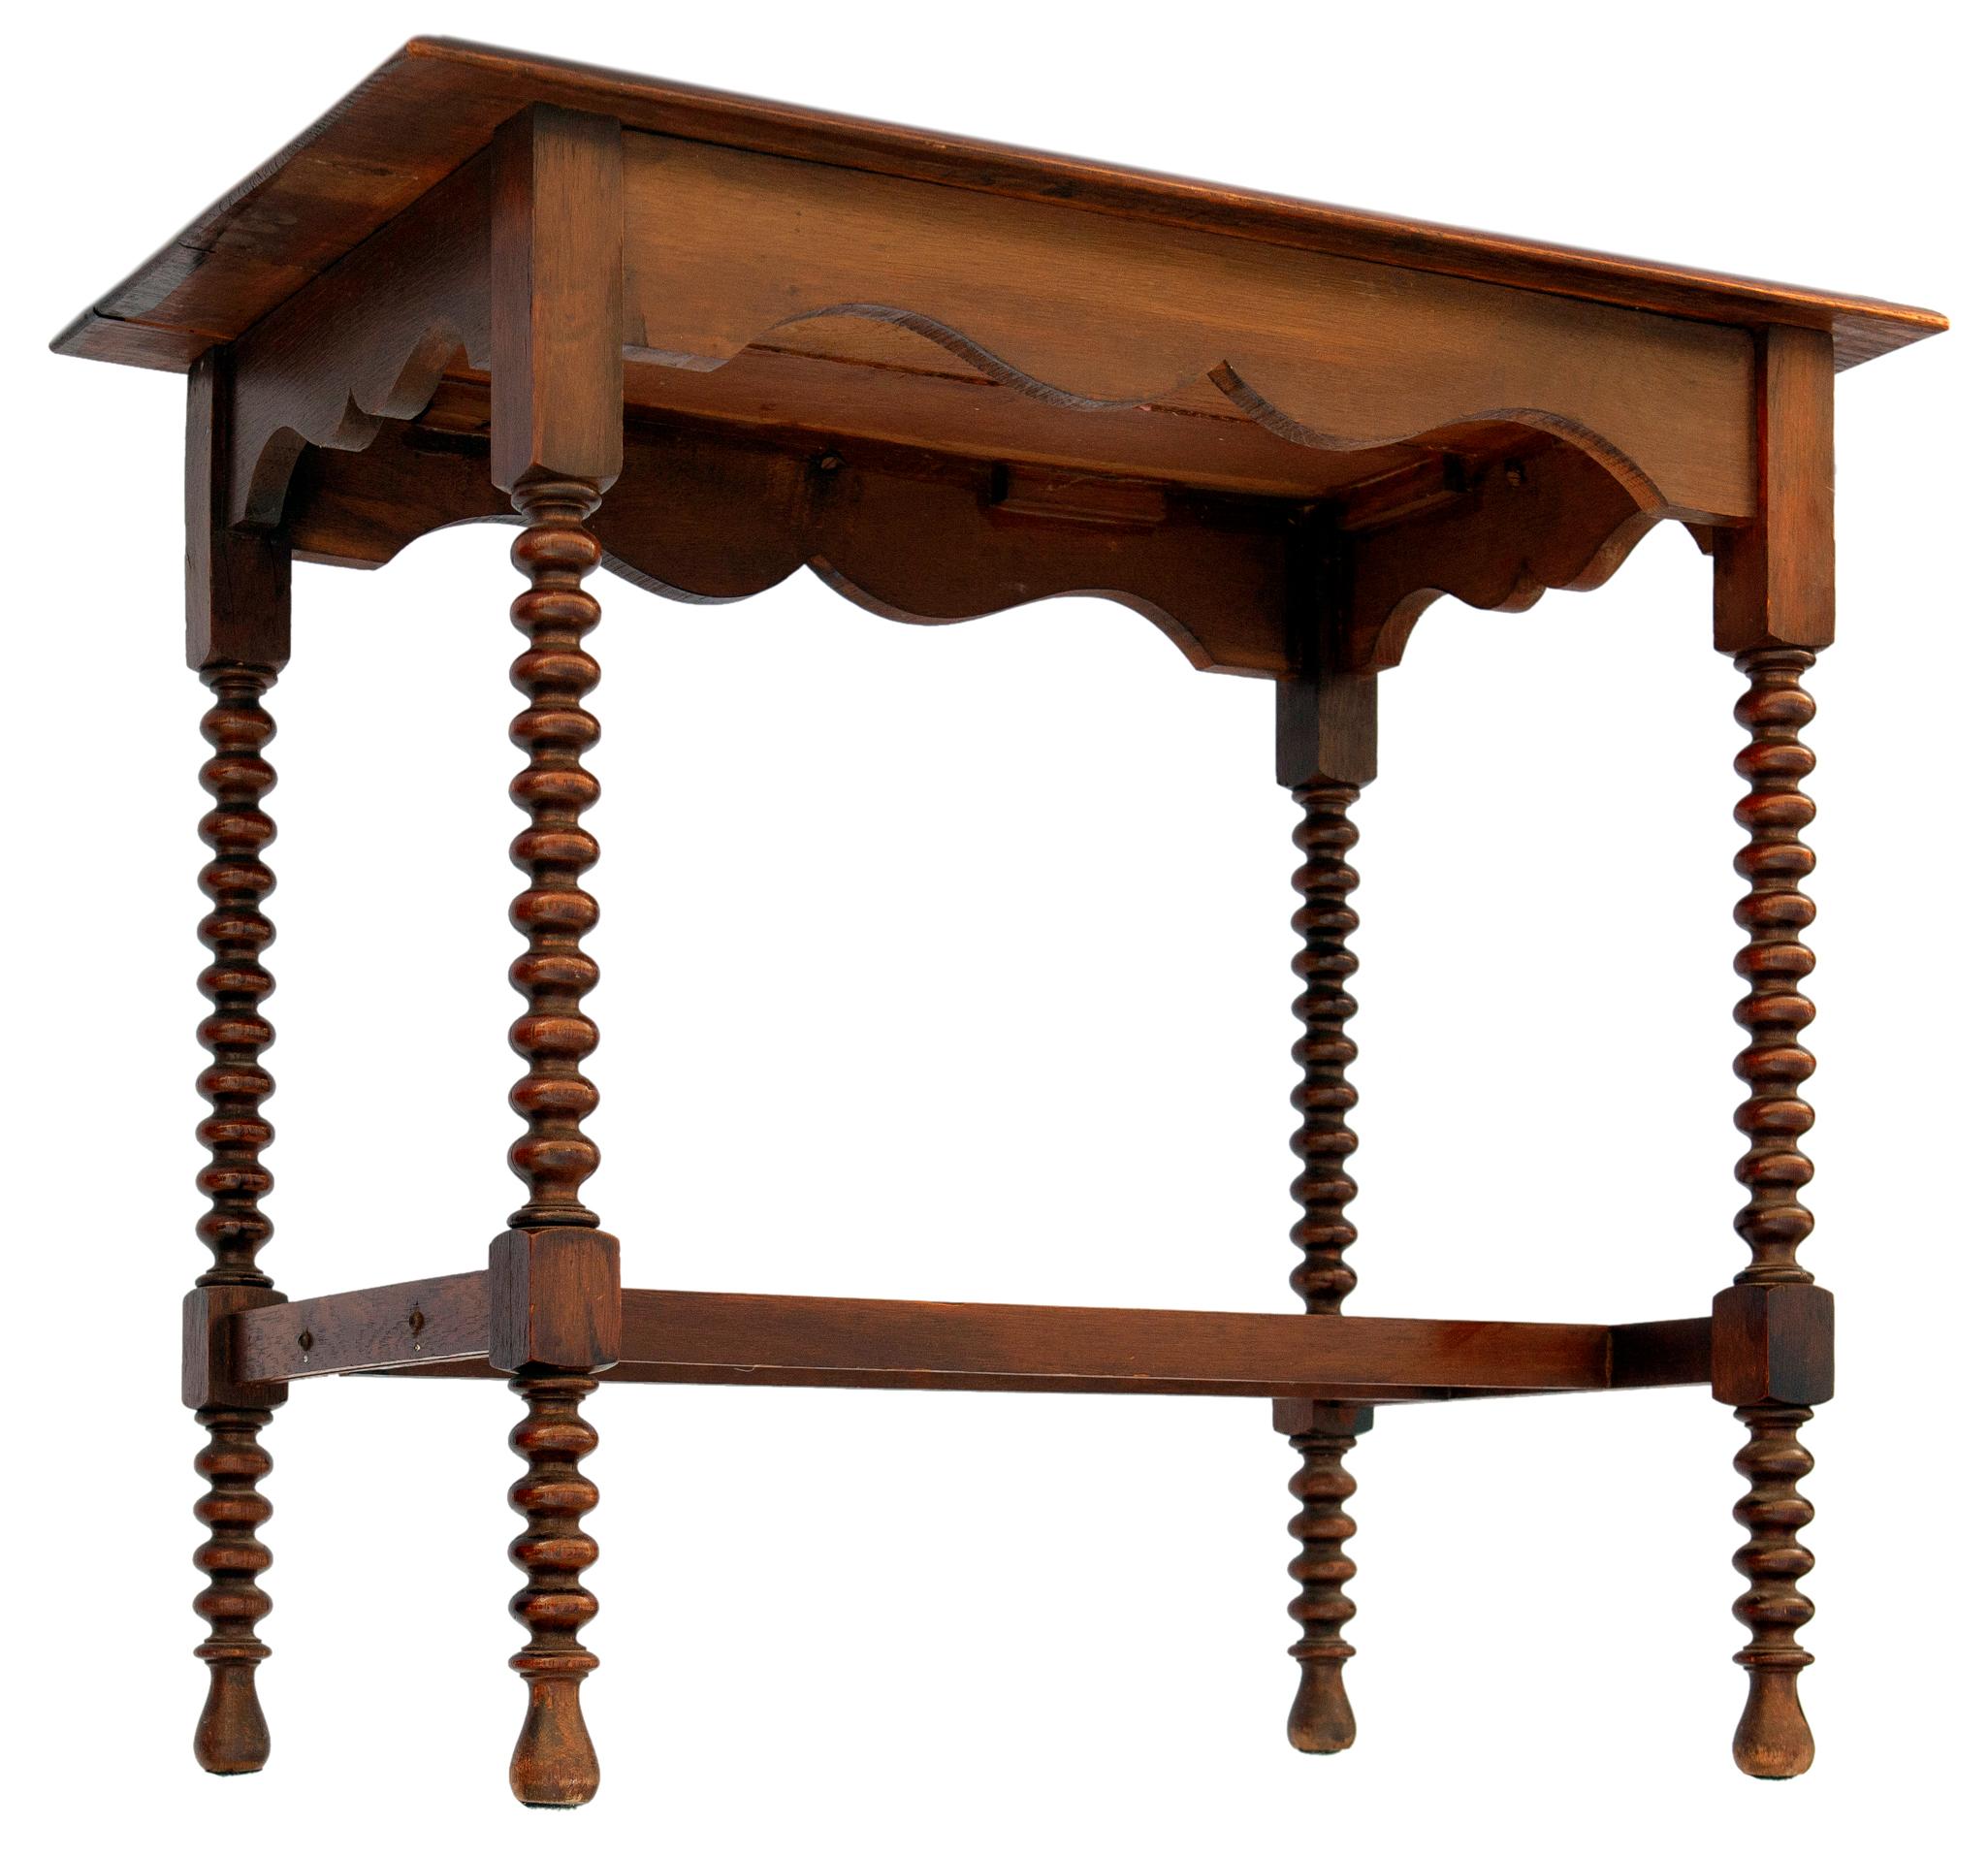 Tall Oak Console Table with Spool Legs & Decorative Apron.
There are 2 stretchers below.